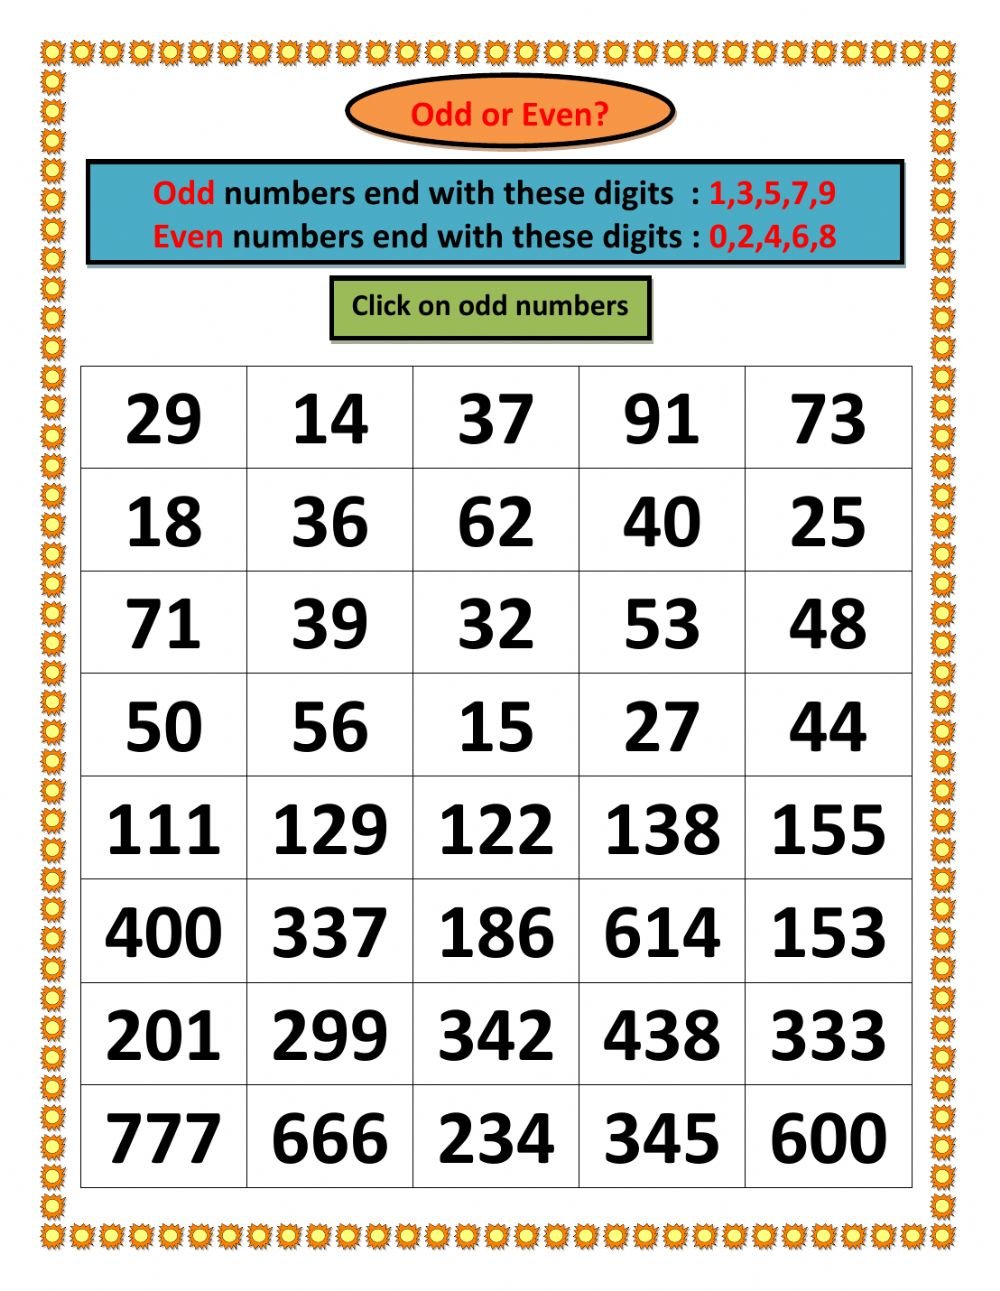 1-to-100-chart-with-odd-numbers